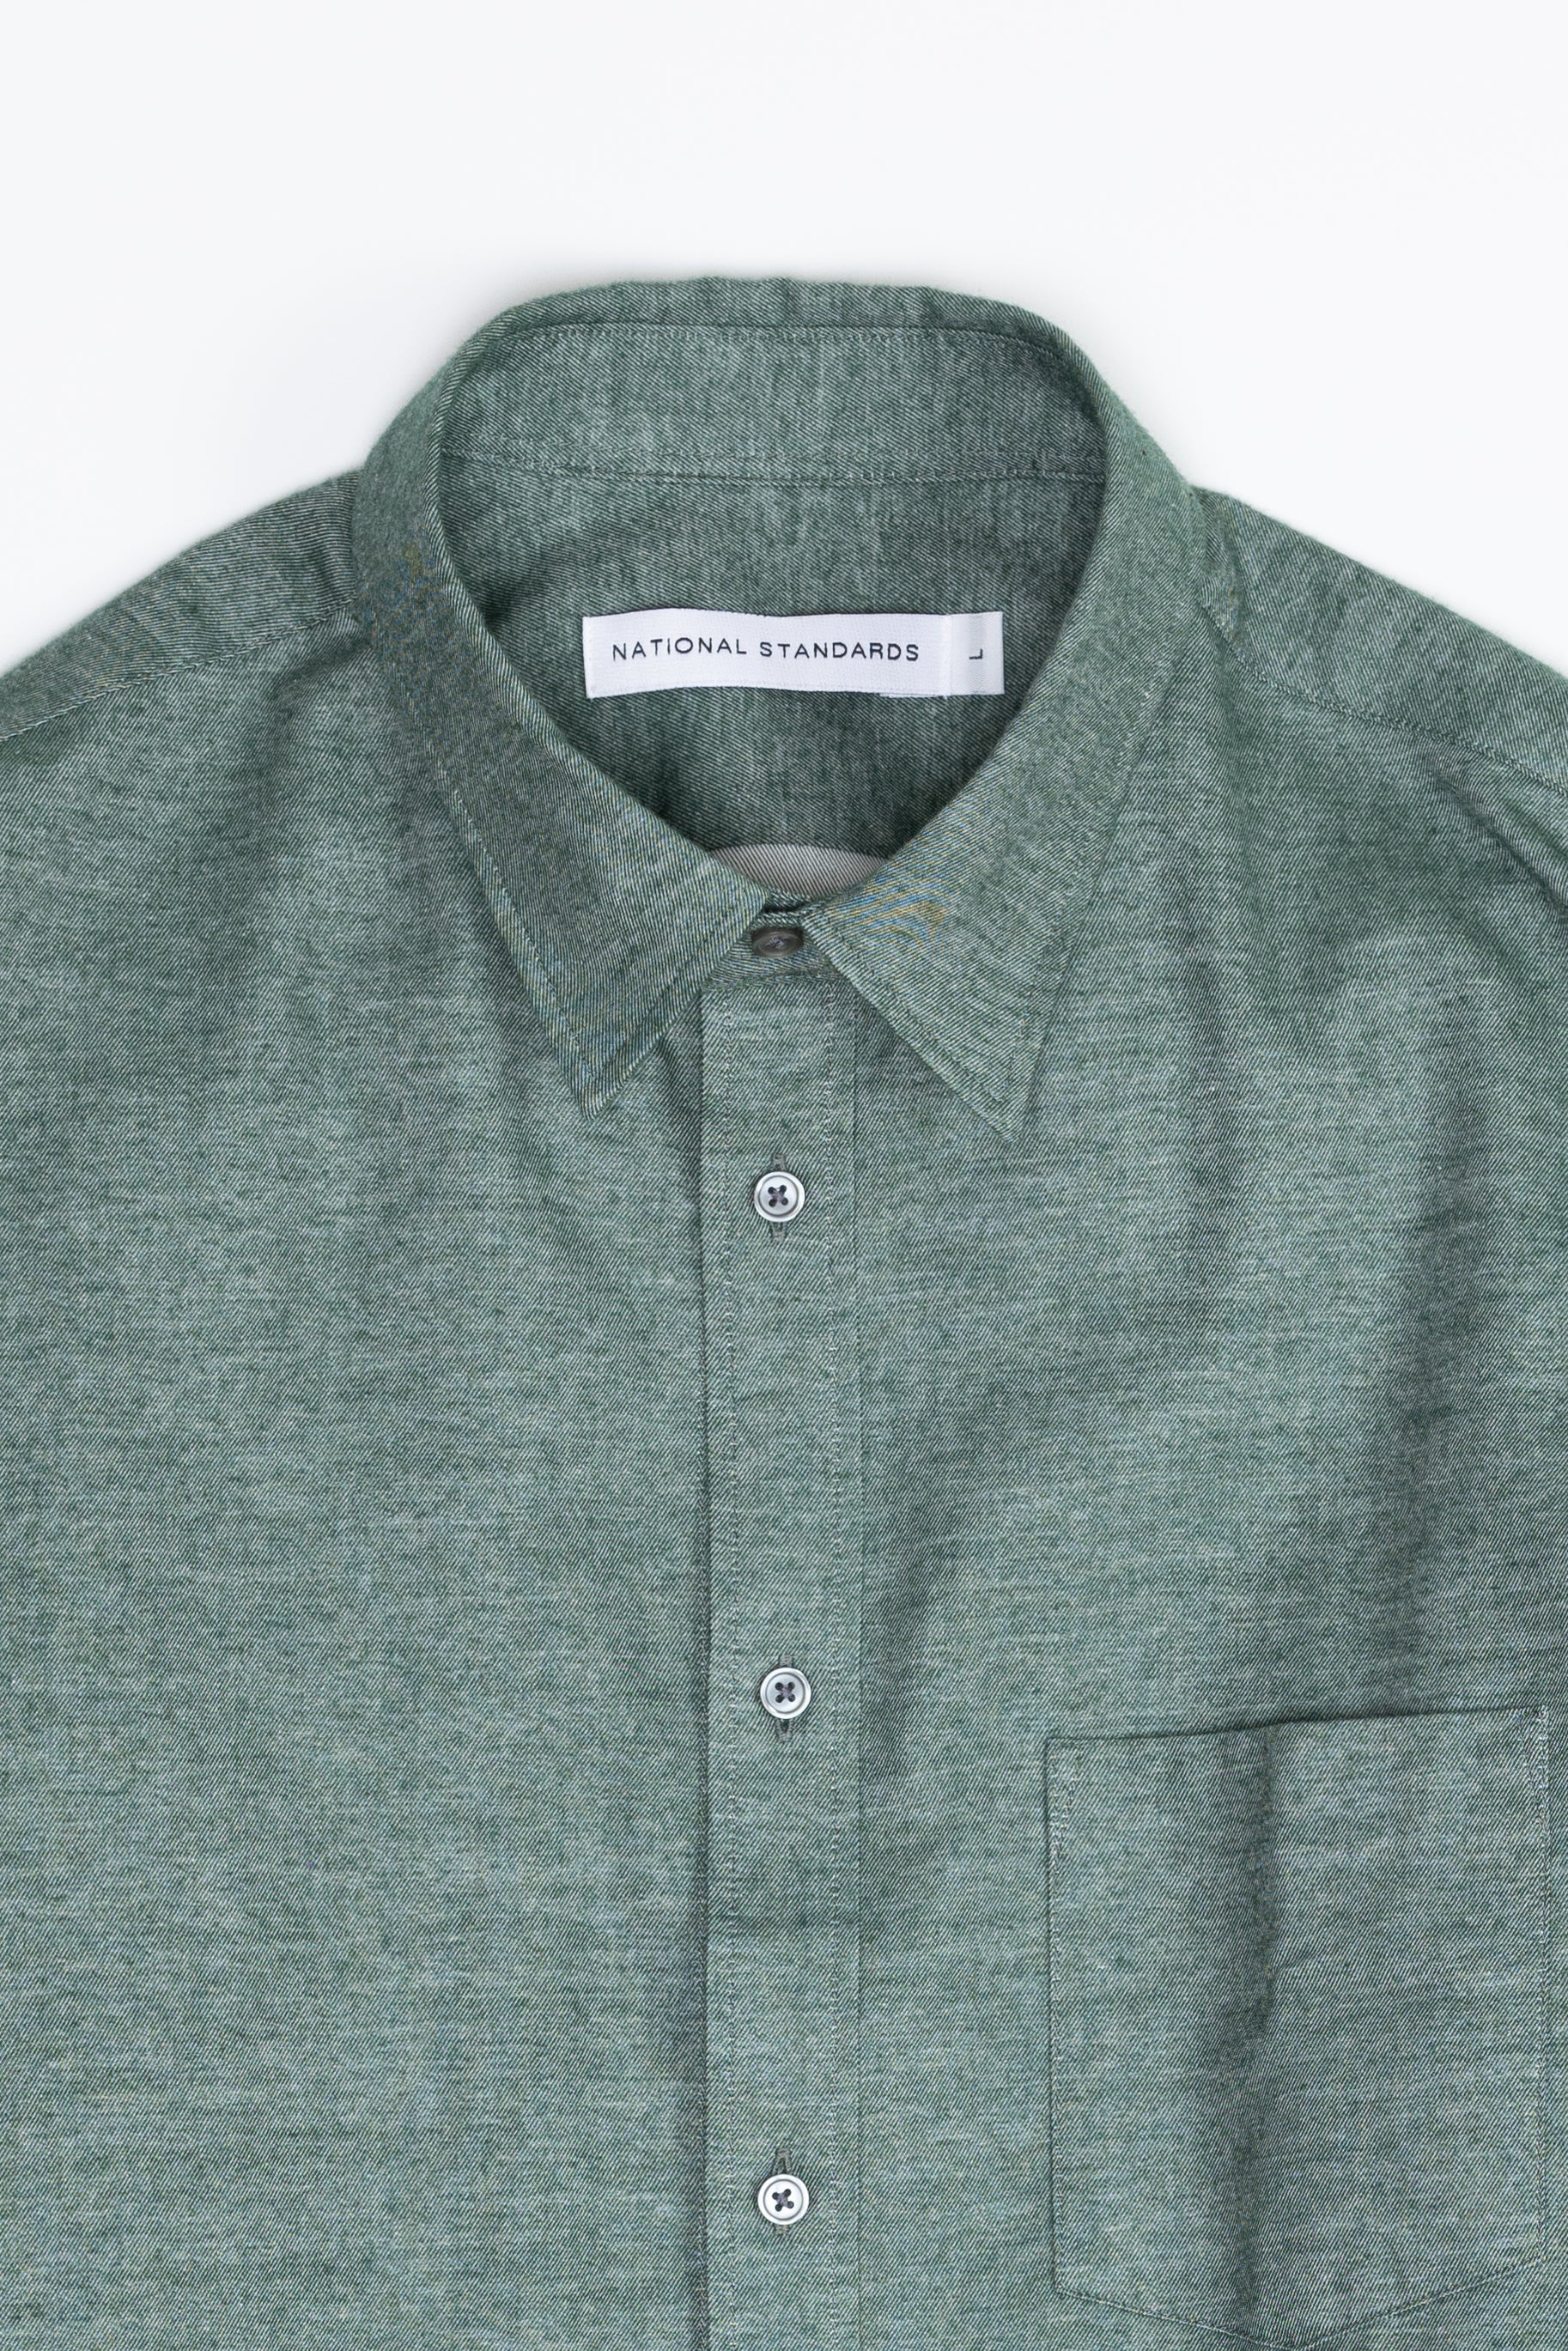 Japanese Brushed Twill in Green 06